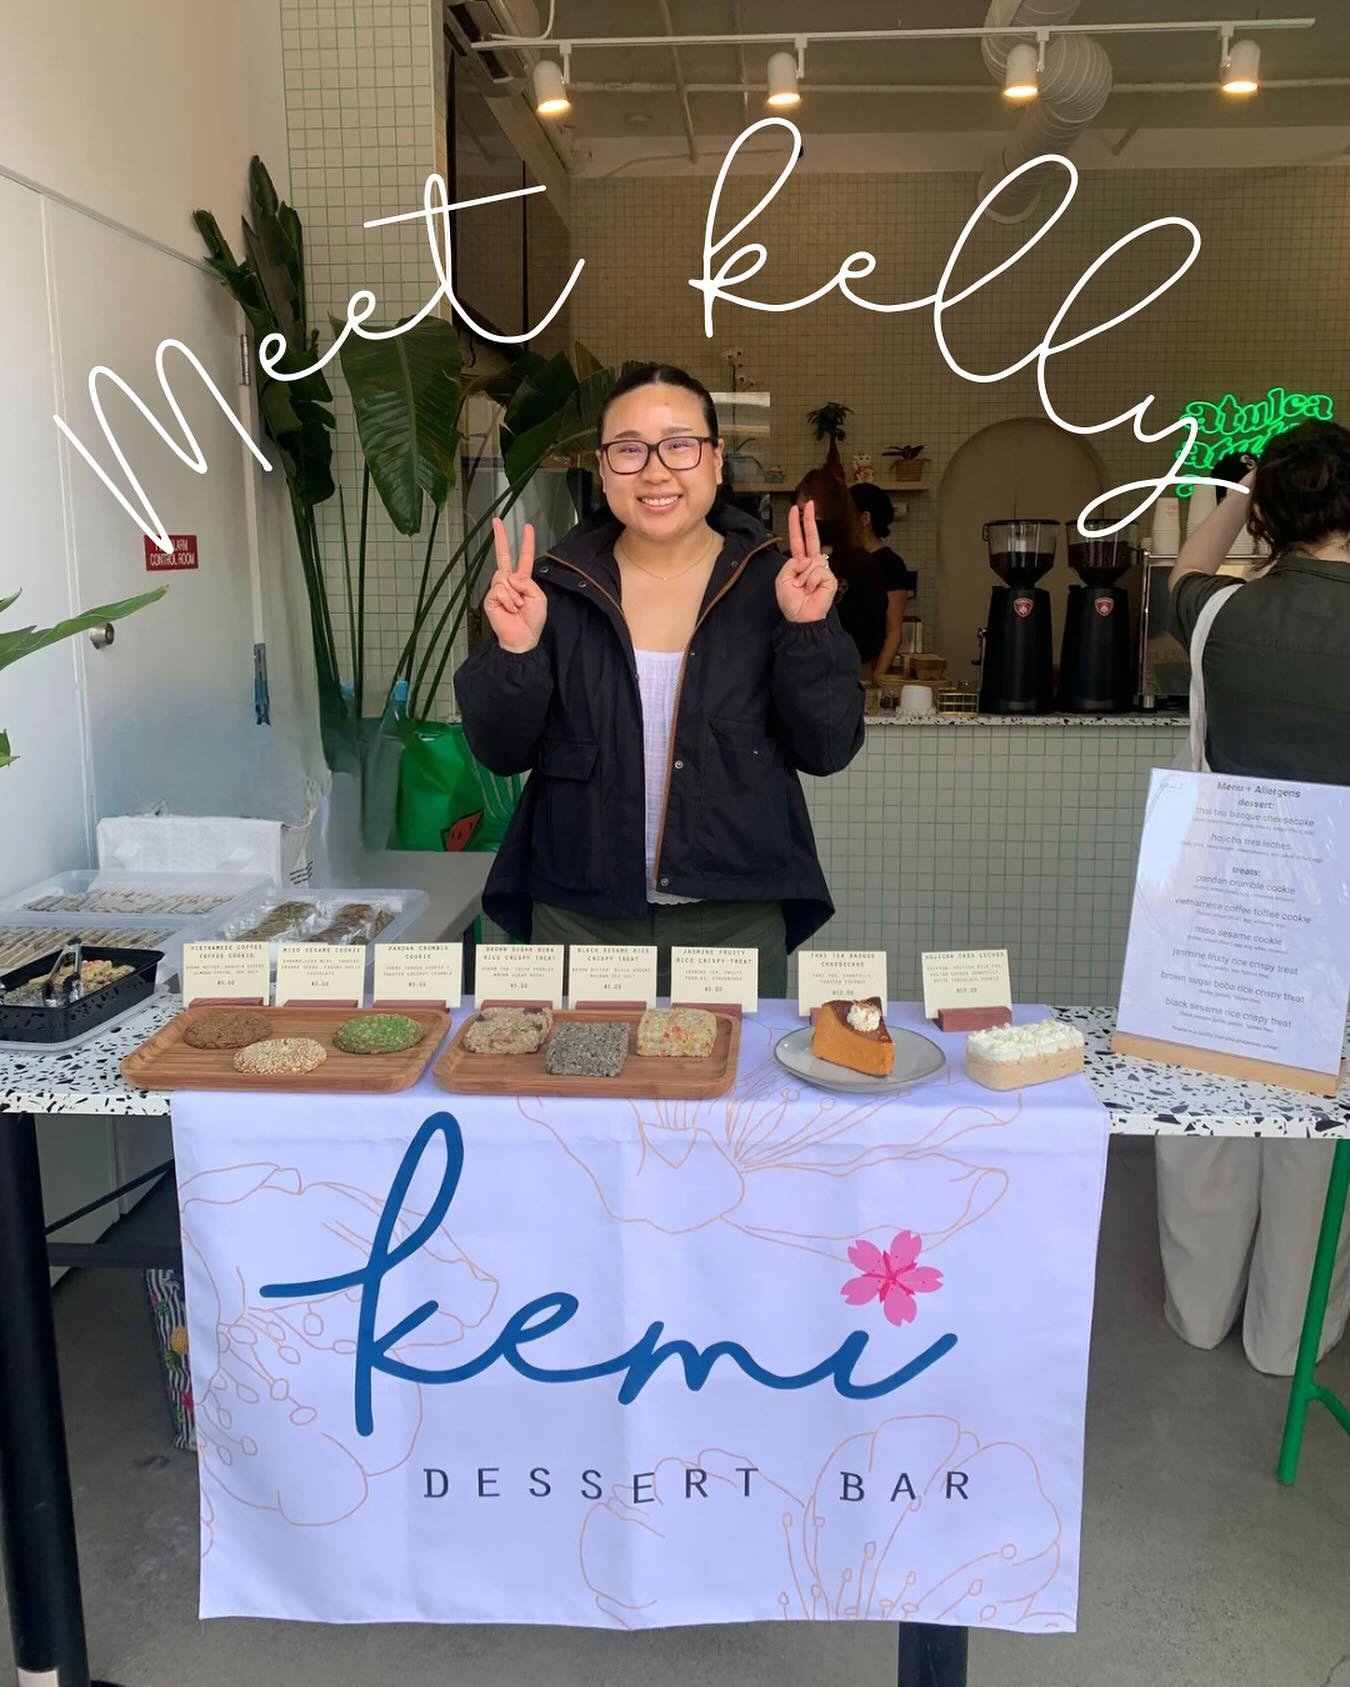 👋Hi, I&rsquo;m Kelly, the owner/baker of Kemi Dessert Bar! 

After three months of pop ups here in Seattle, I thought it was time to properly introduce myself 😁

Long story short, I was born and raised in NY, started working in bakeries/restaurants